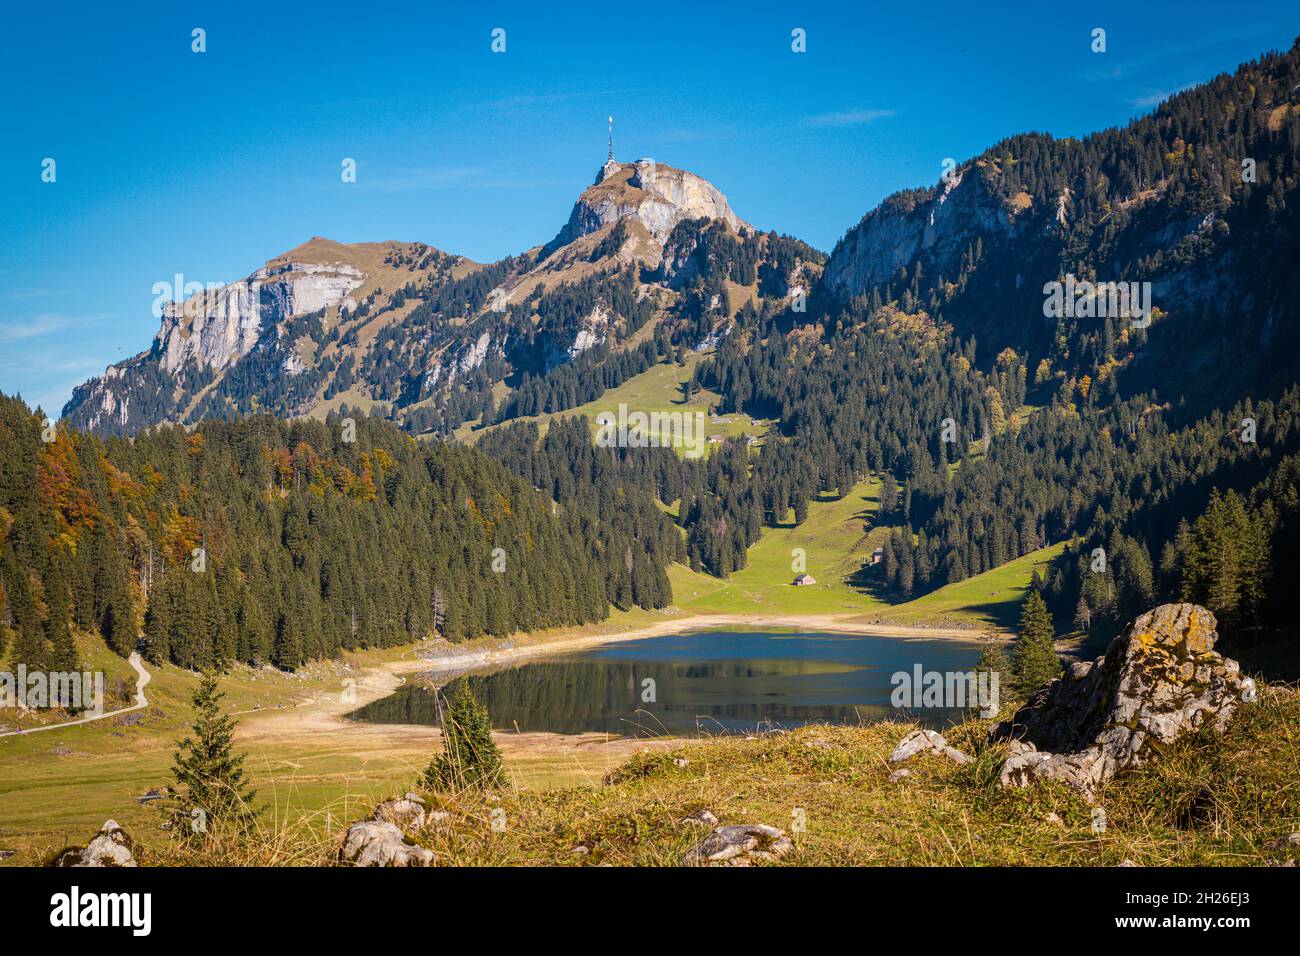 Lake Saemtisersee with the Hoher Kaset mountain in the background Stock Photo